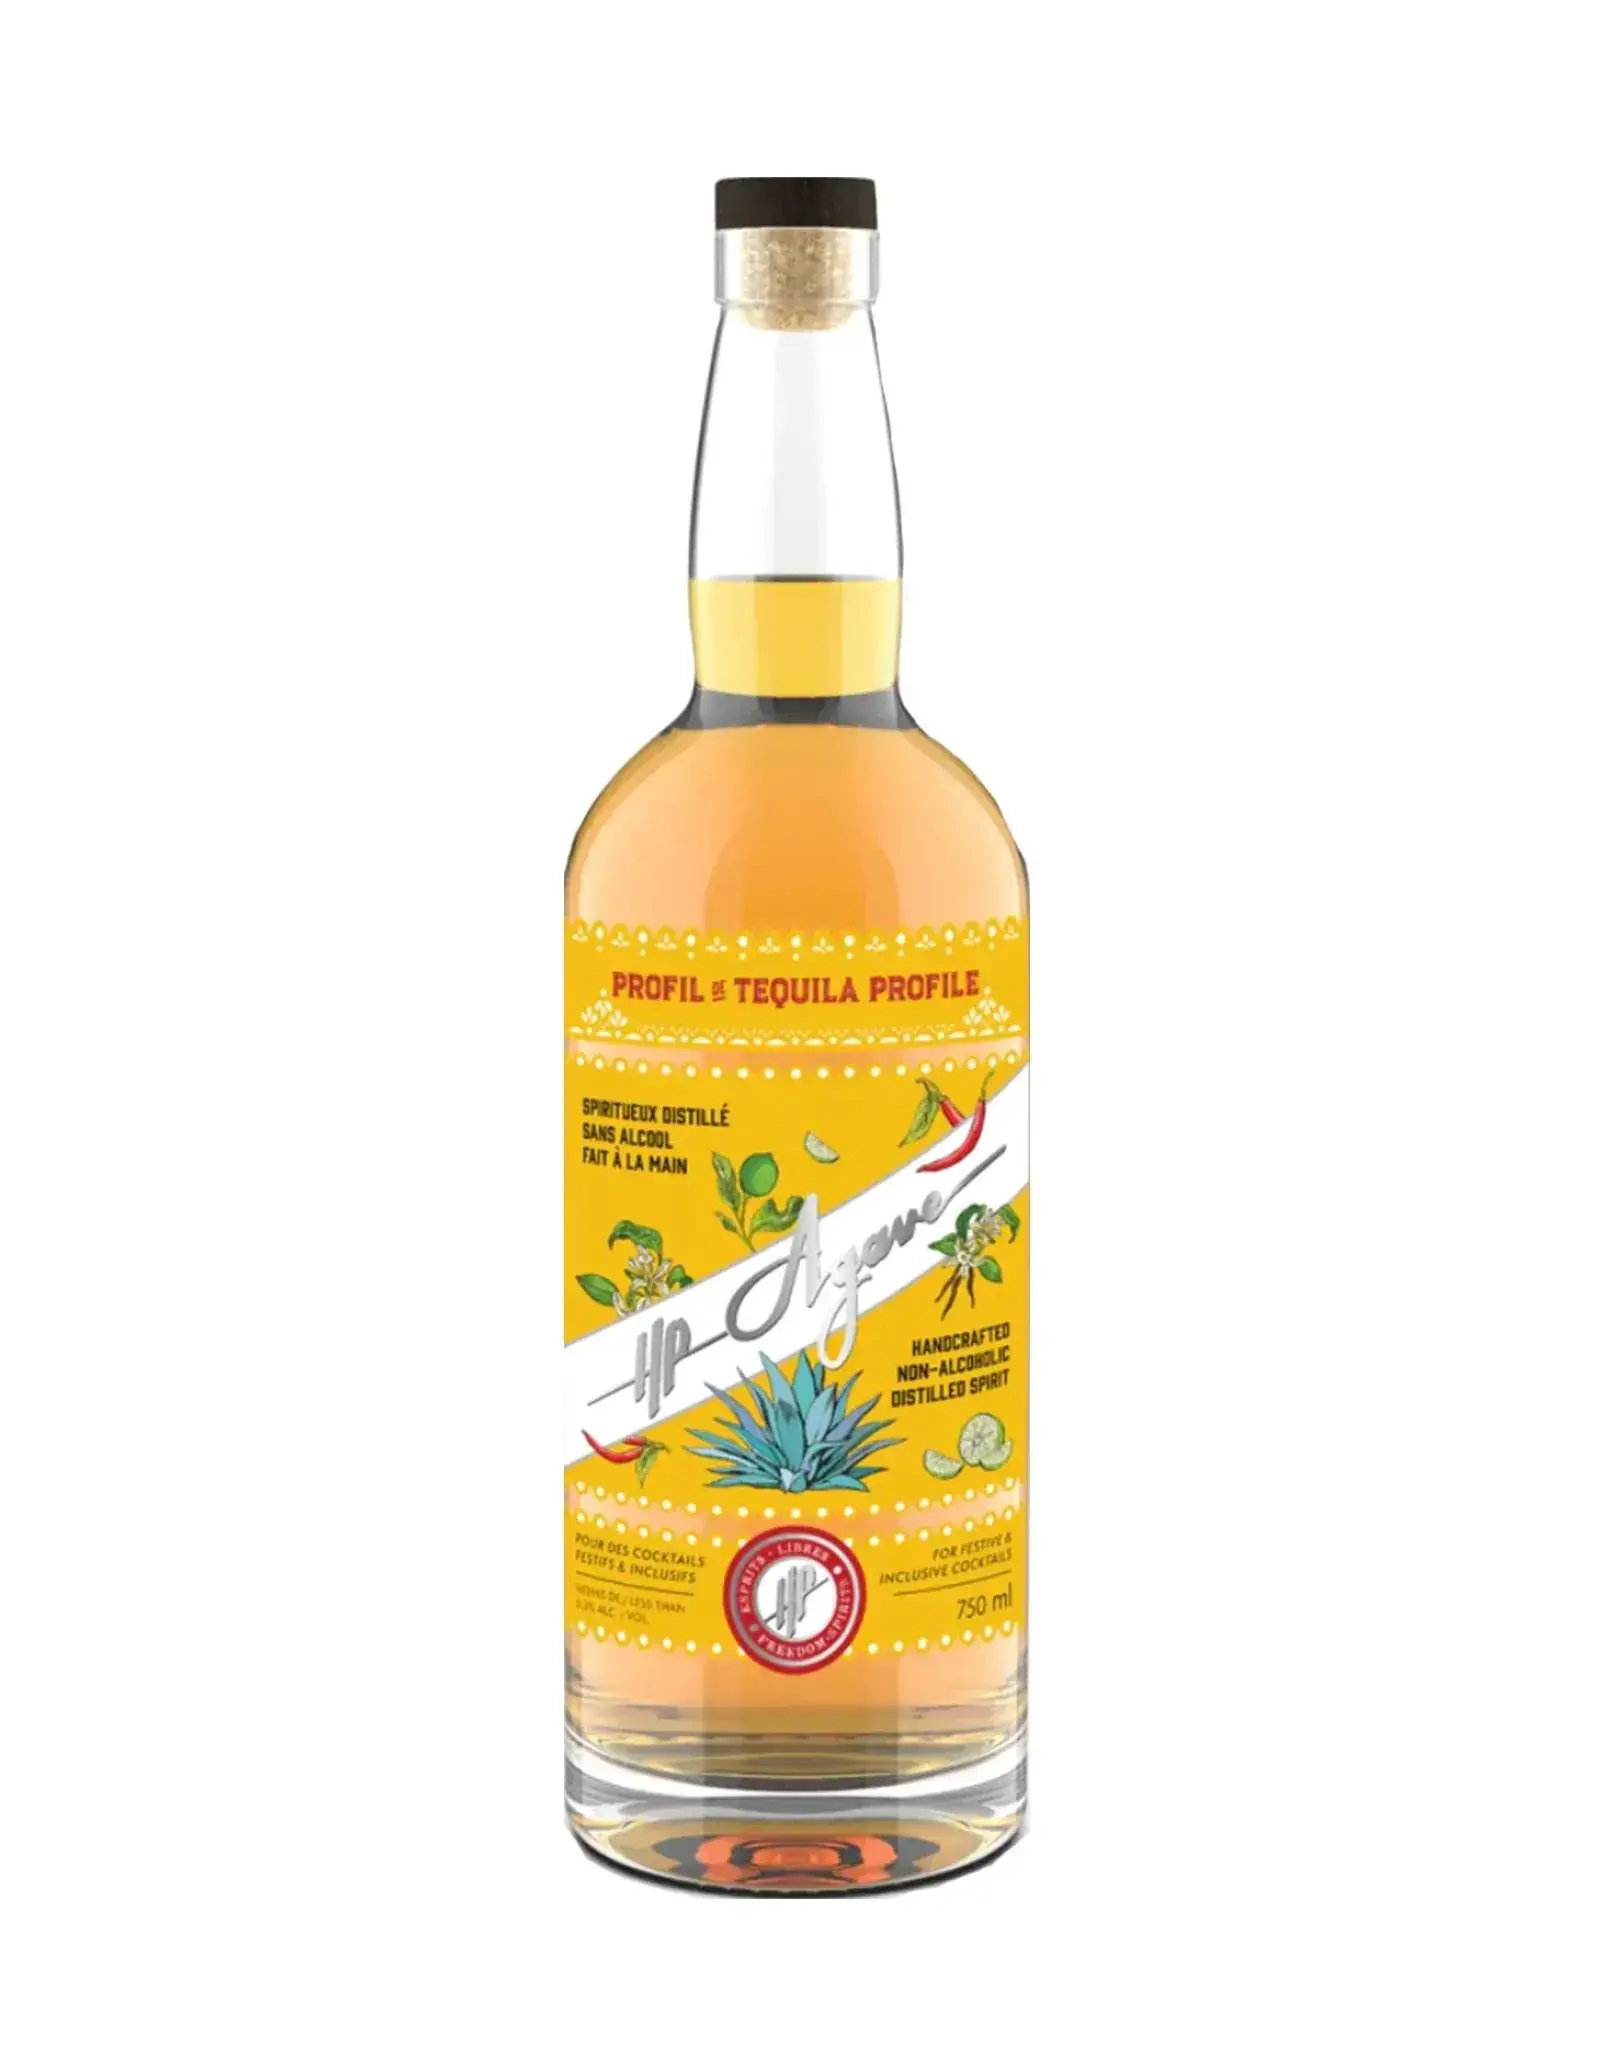 JMI - HP Agave / Non-Alcoholic Tequila, 750ml